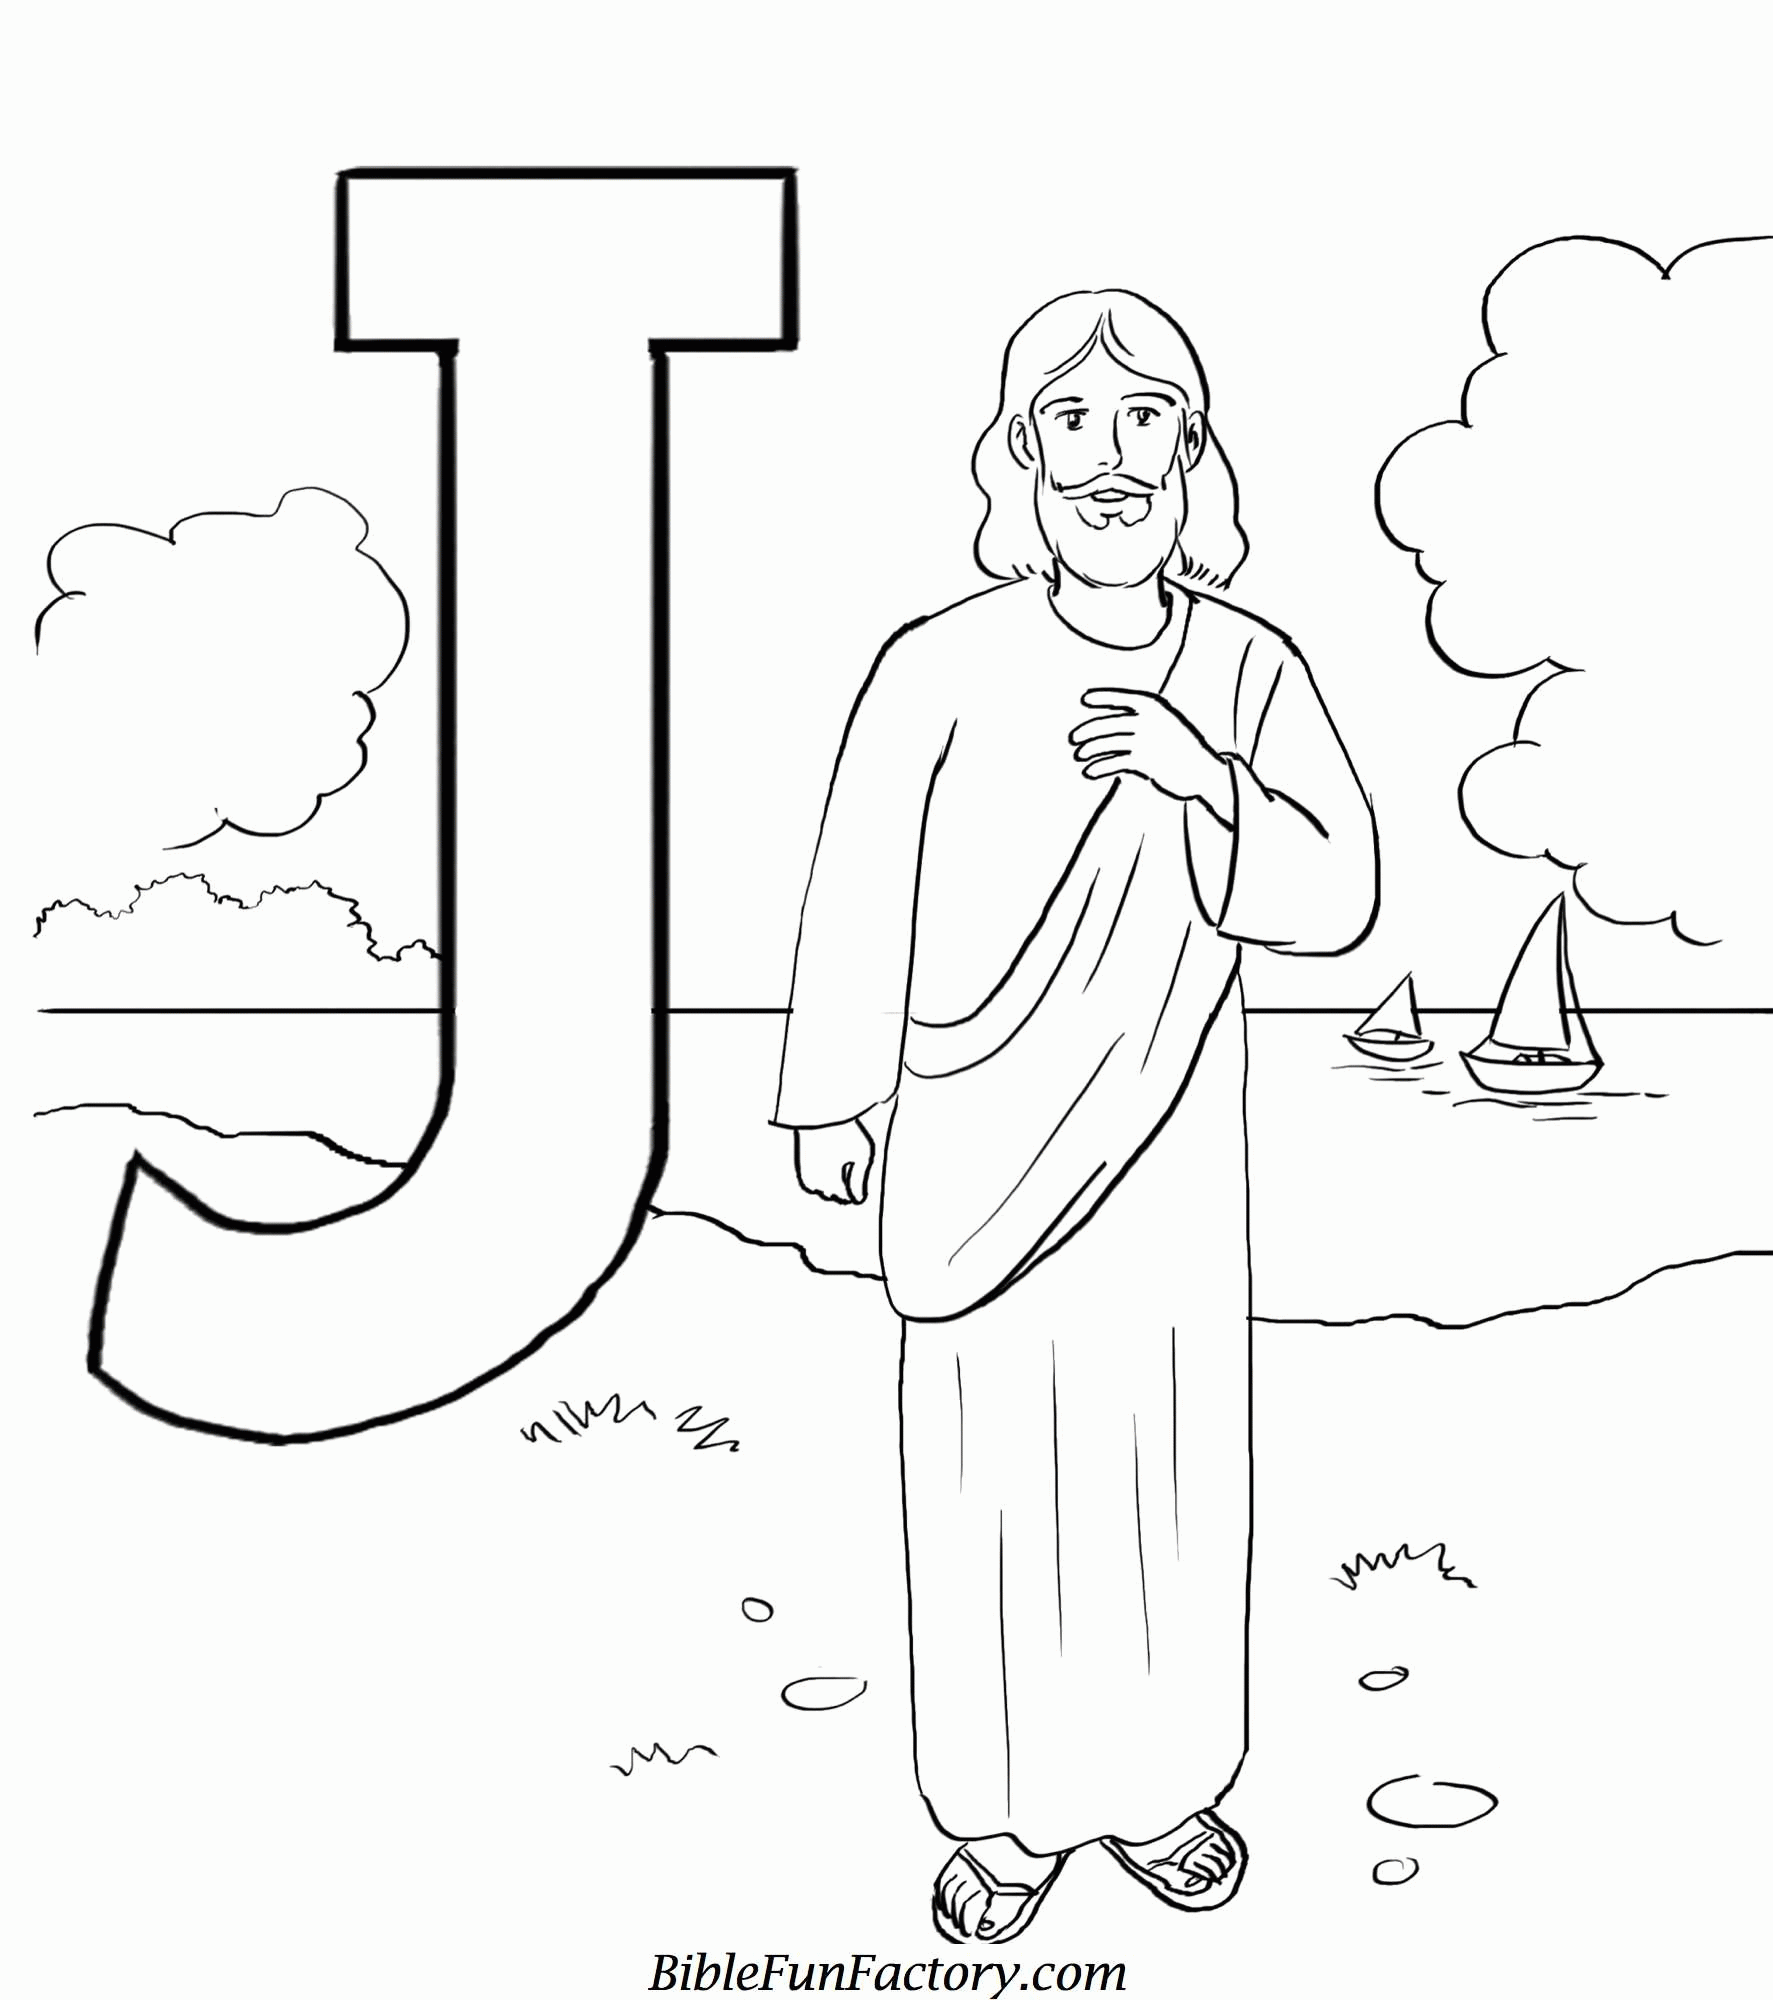 Download Coloring Pages For Kids About Jesus Love - Coloring Home